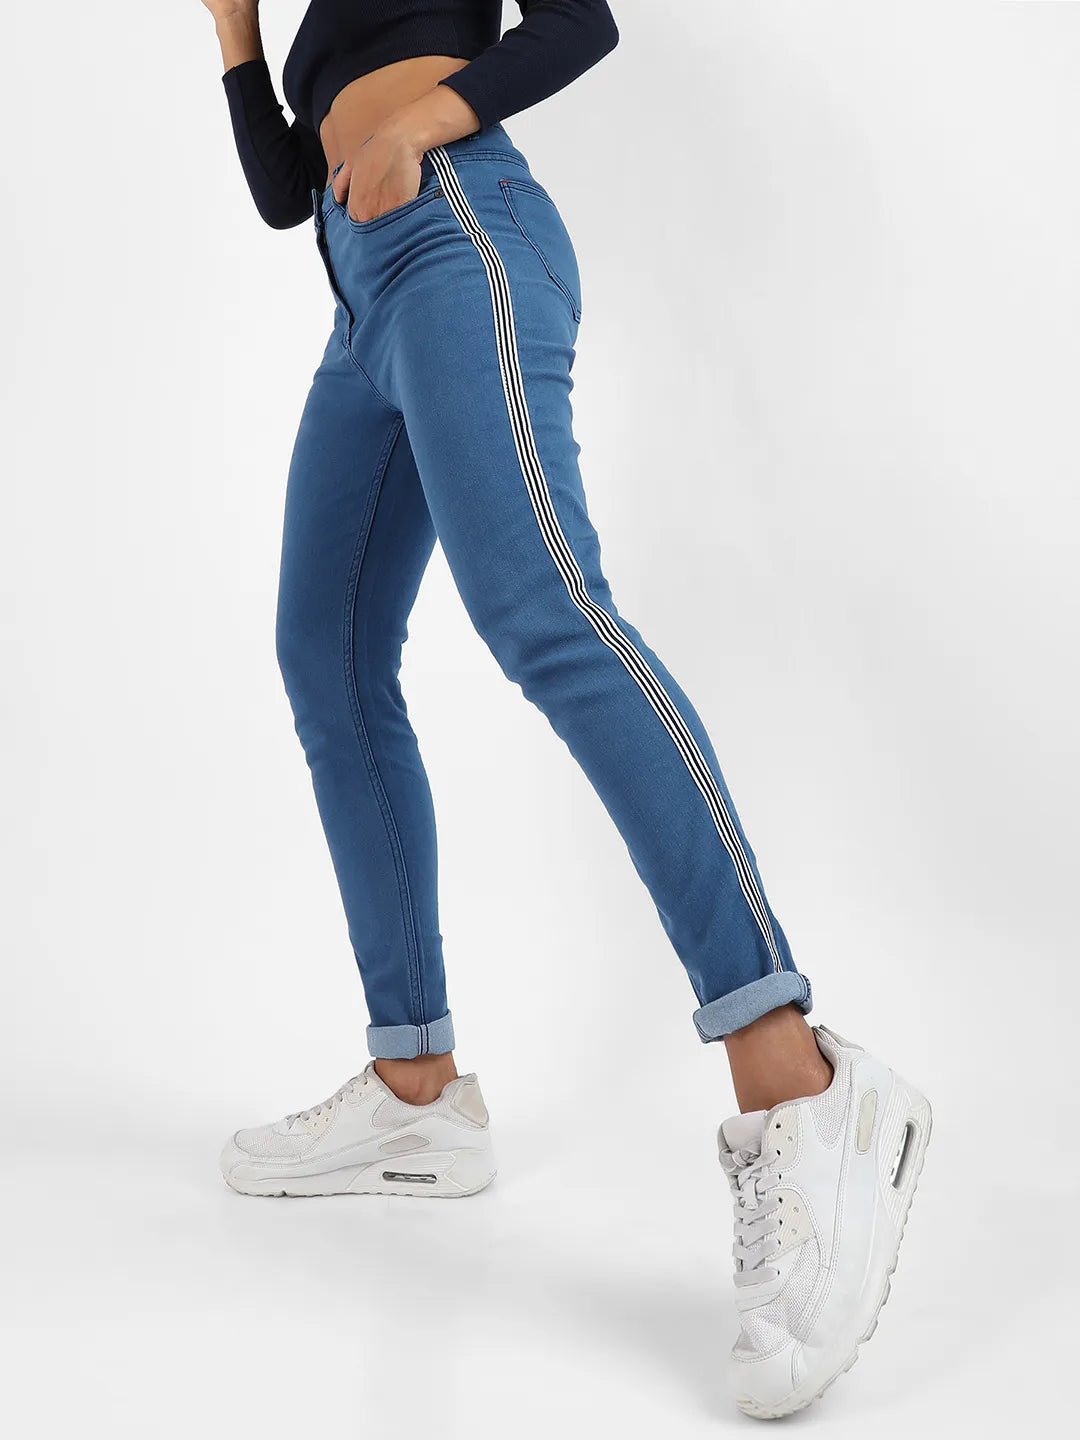 Details more than 168 striped denim jeans womens latest